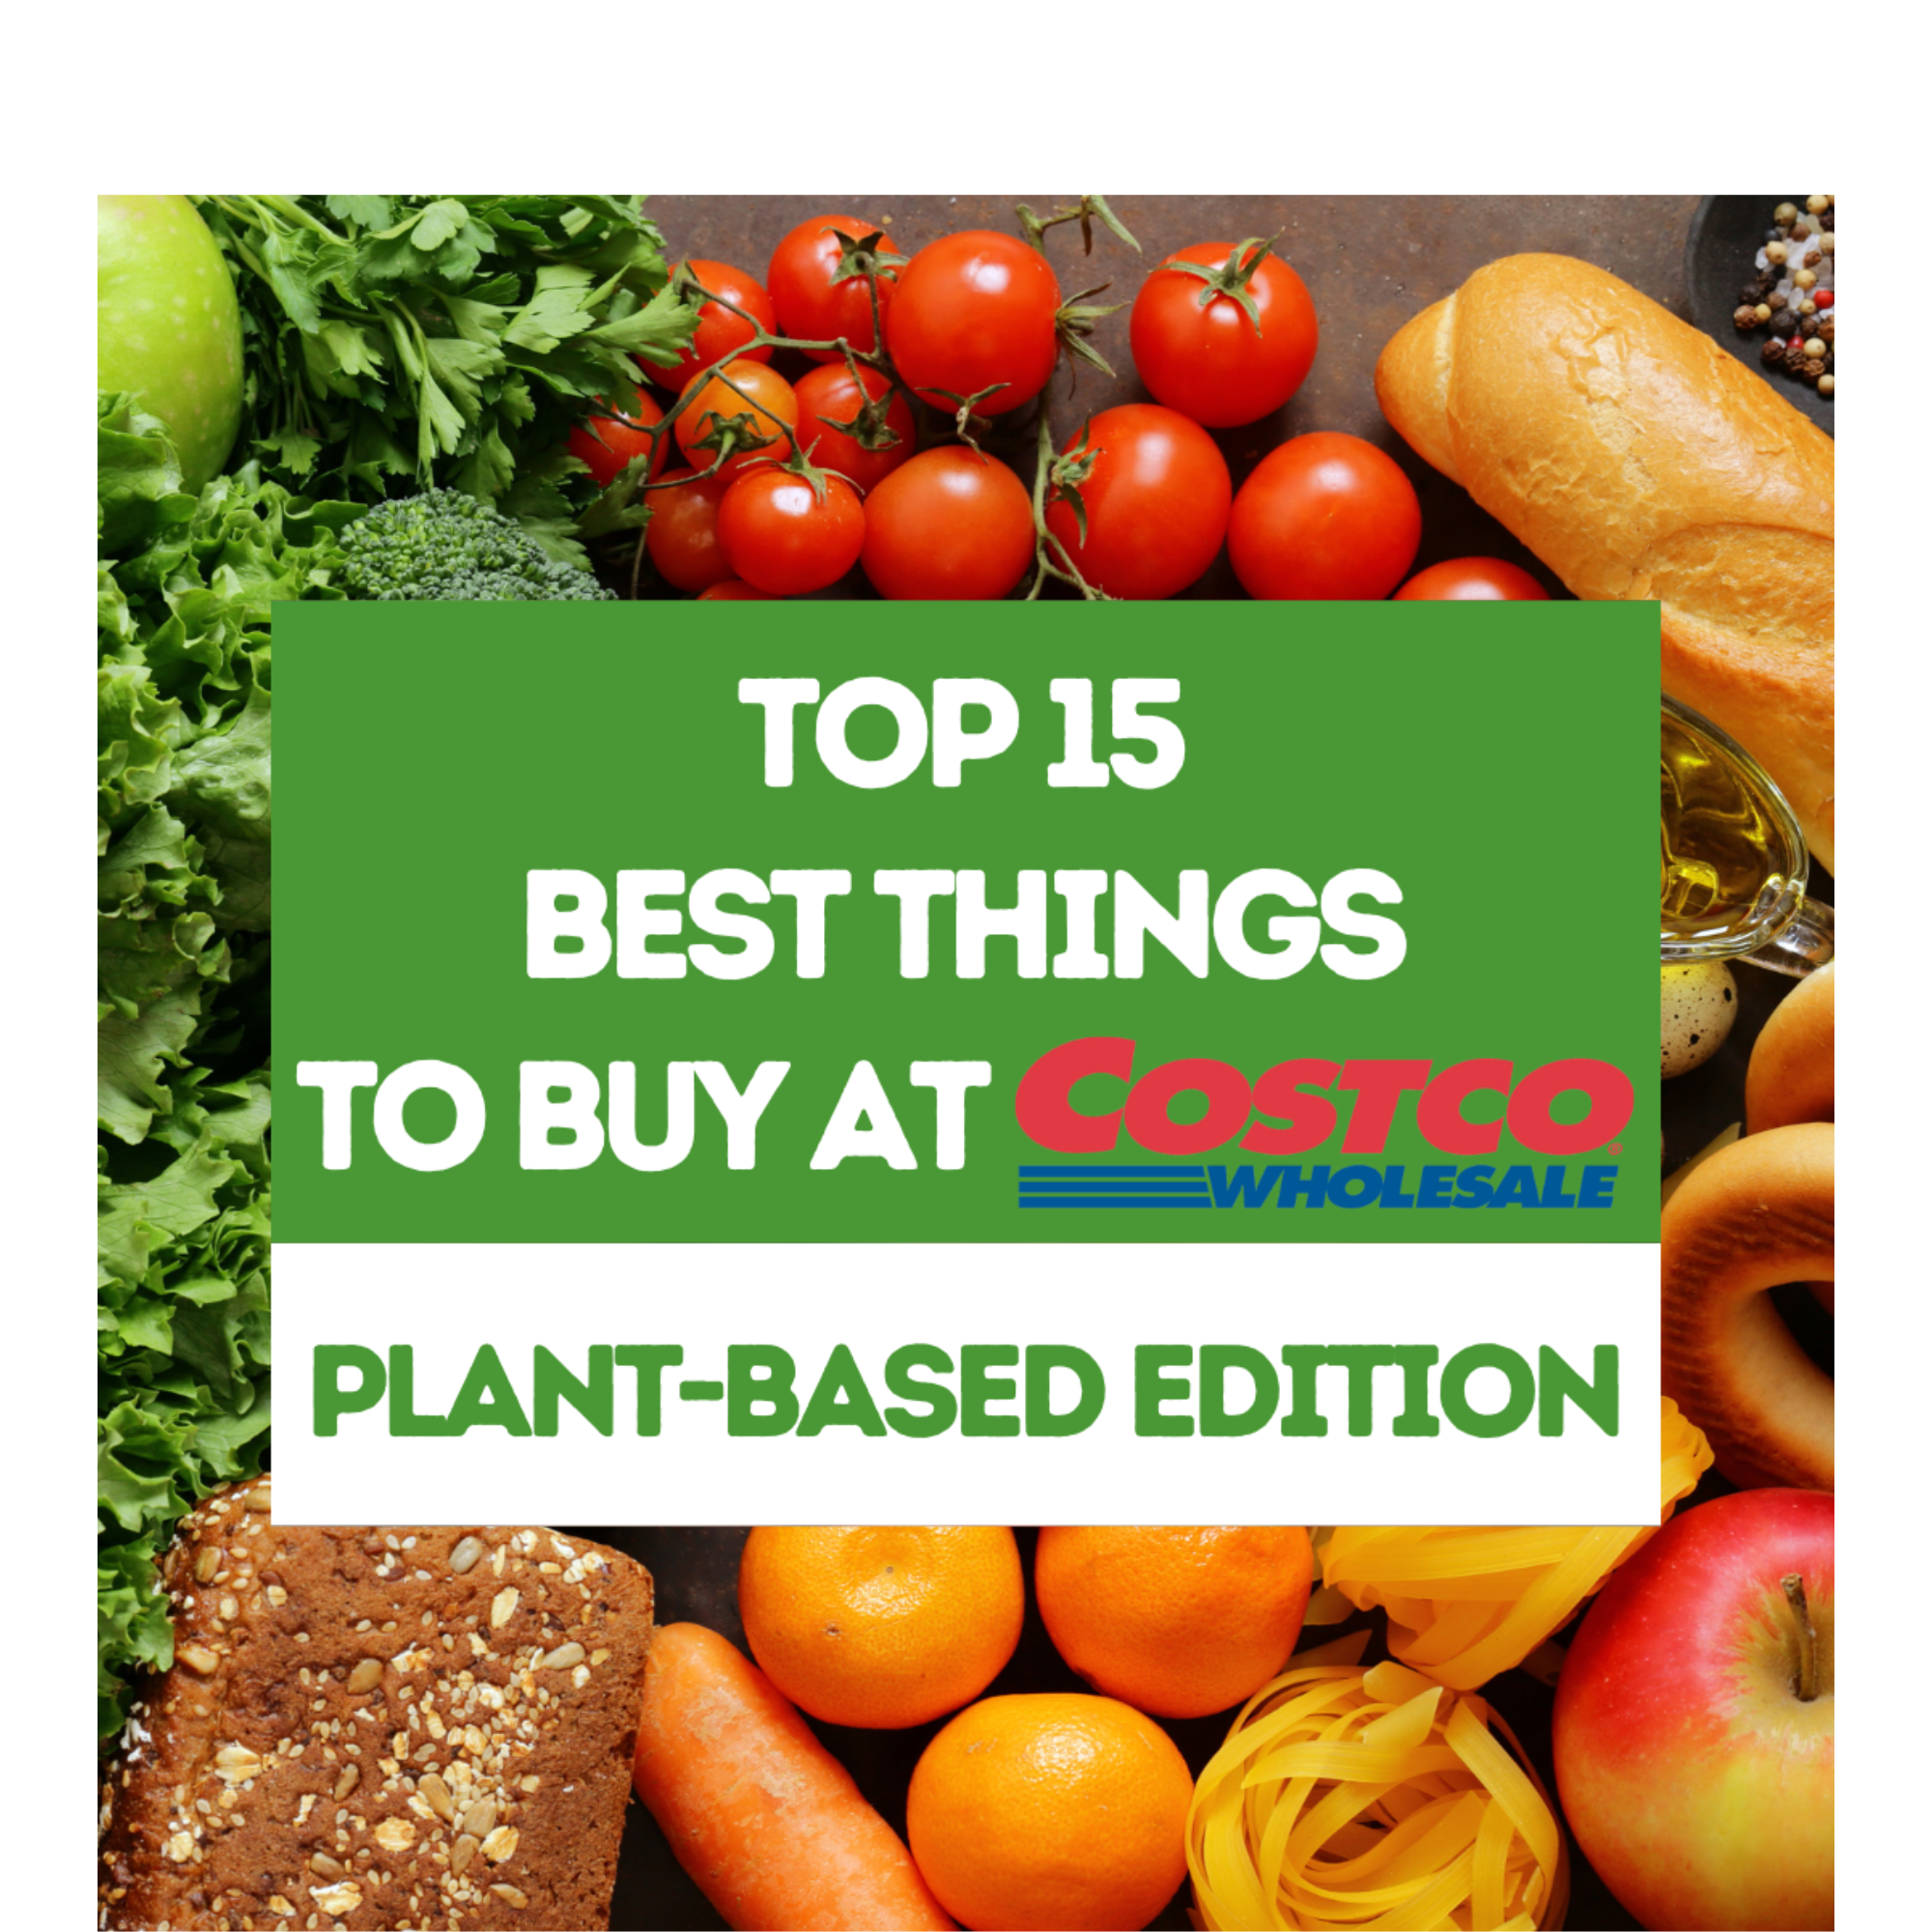 Top 15 Best Things to Buy at Costco: Plant-Based Edition - Sharon